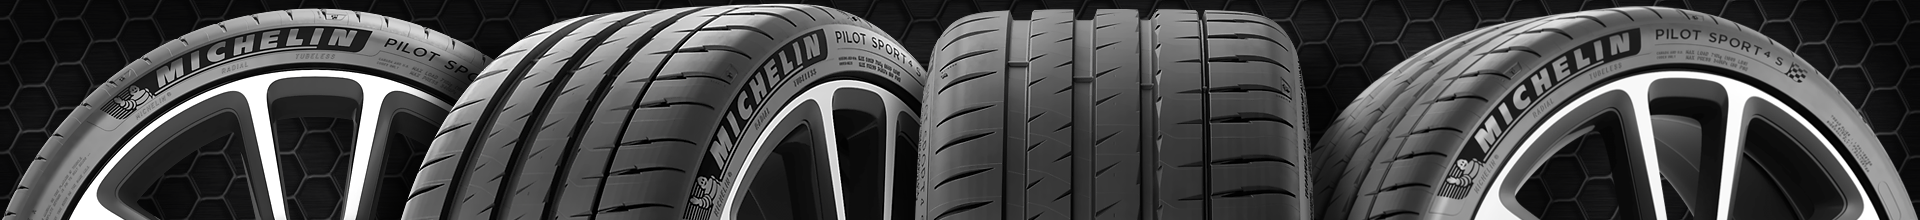 185 65 15 discount tires from Tire Outlet US